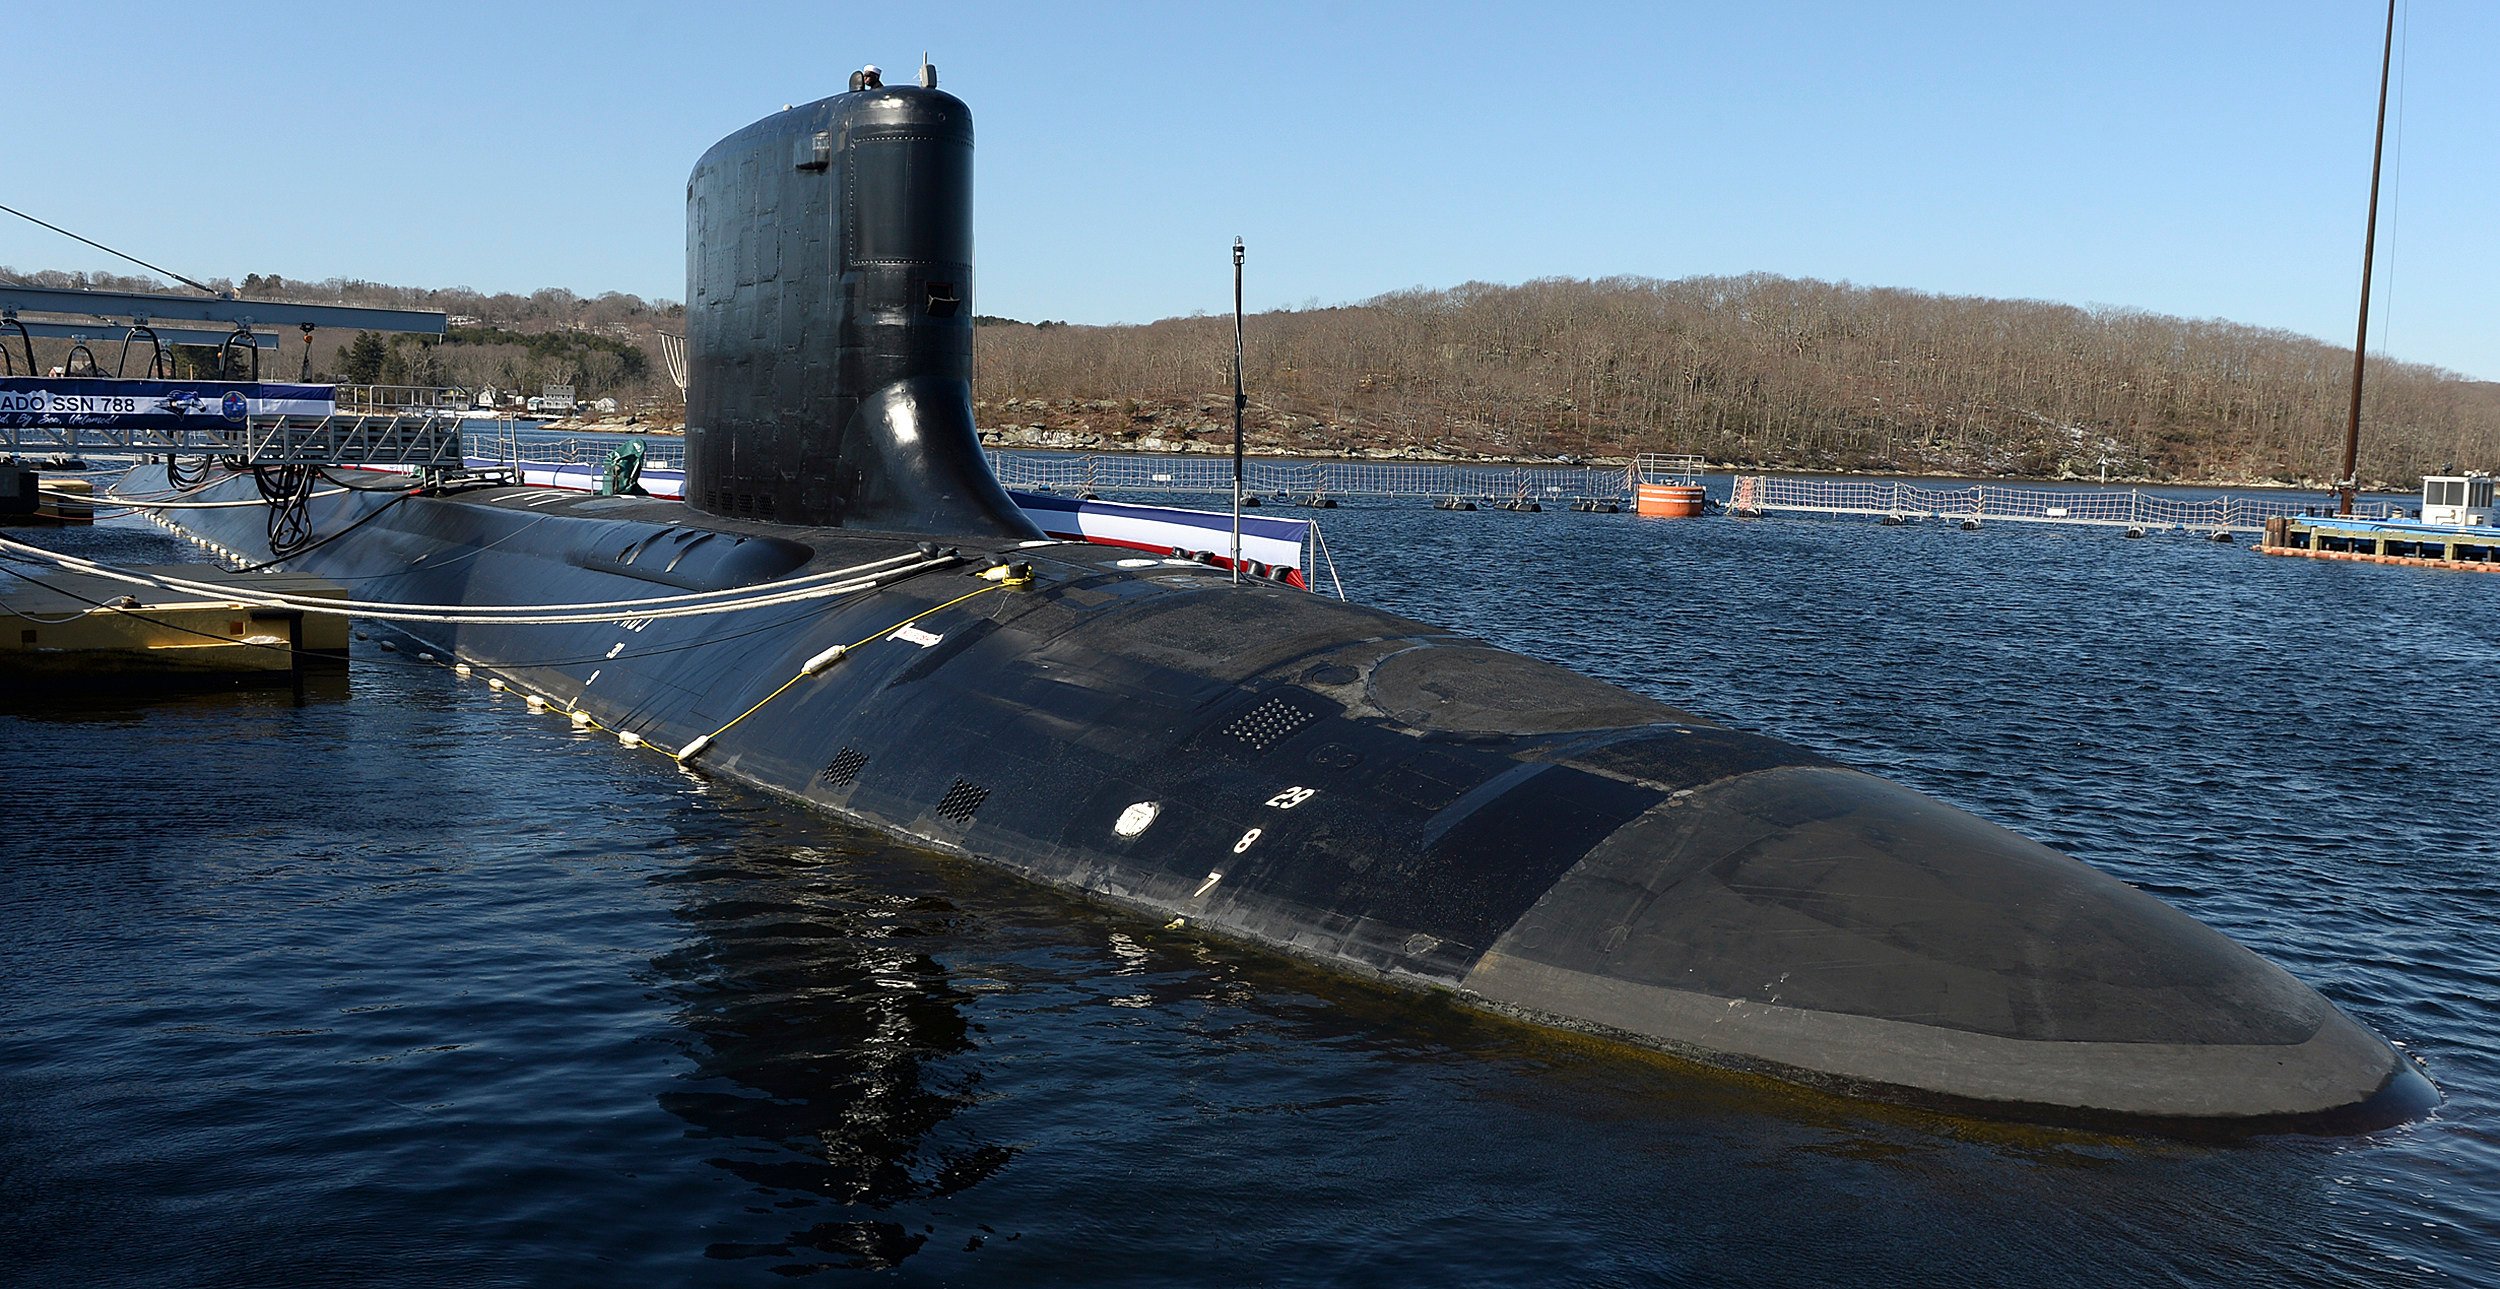 A Virginia-class submarine is docked at a naval base in Connecticut, US. File photo: AP